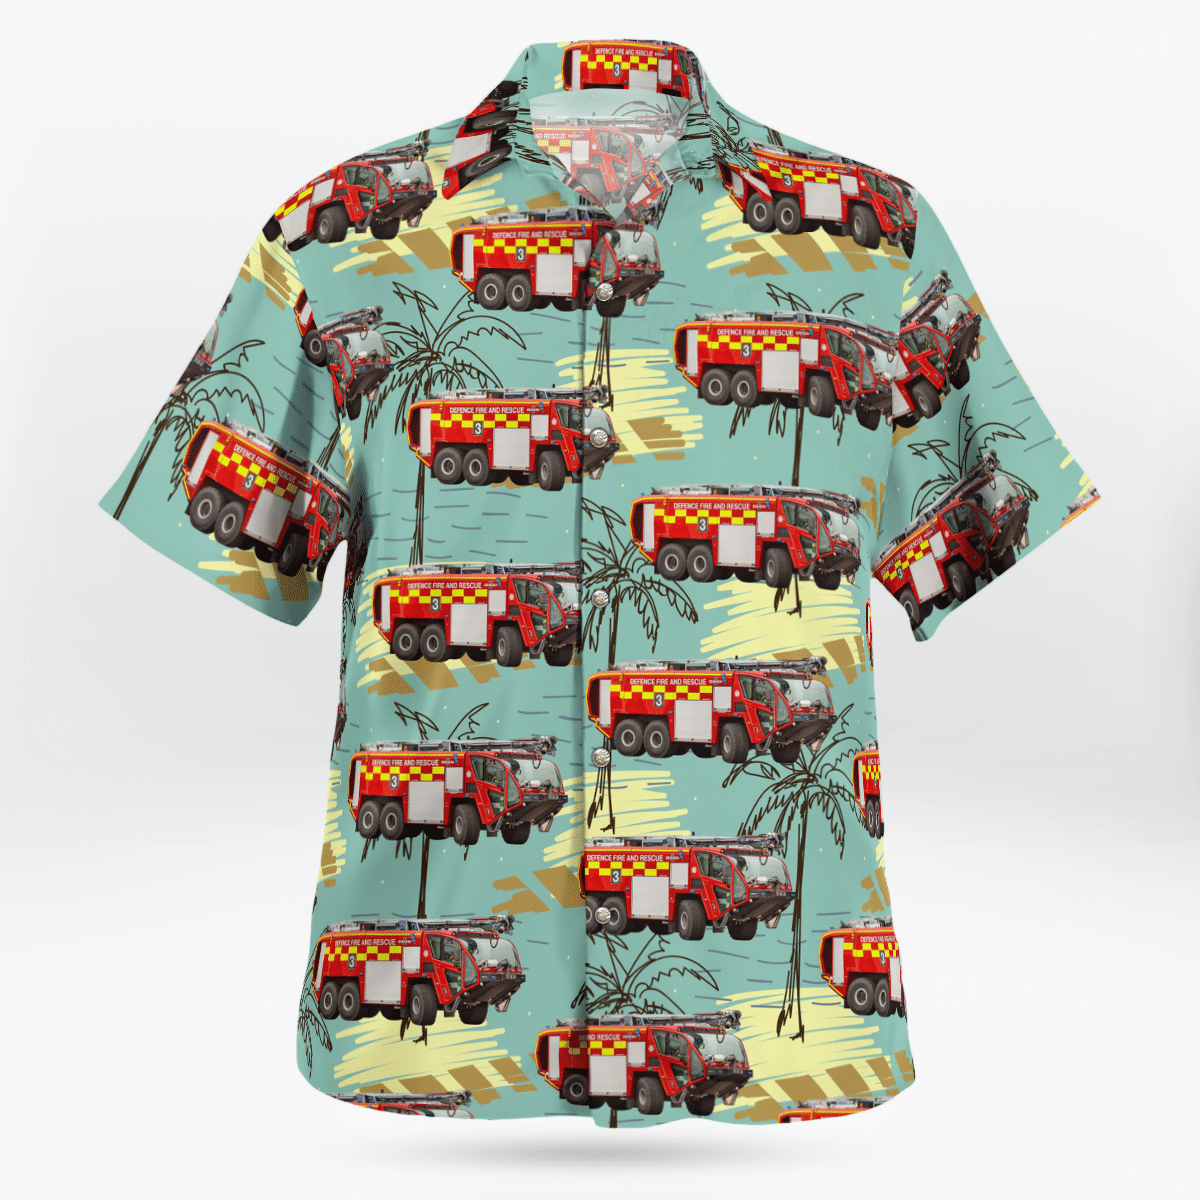 Hawaiian shirts never go out of style 227